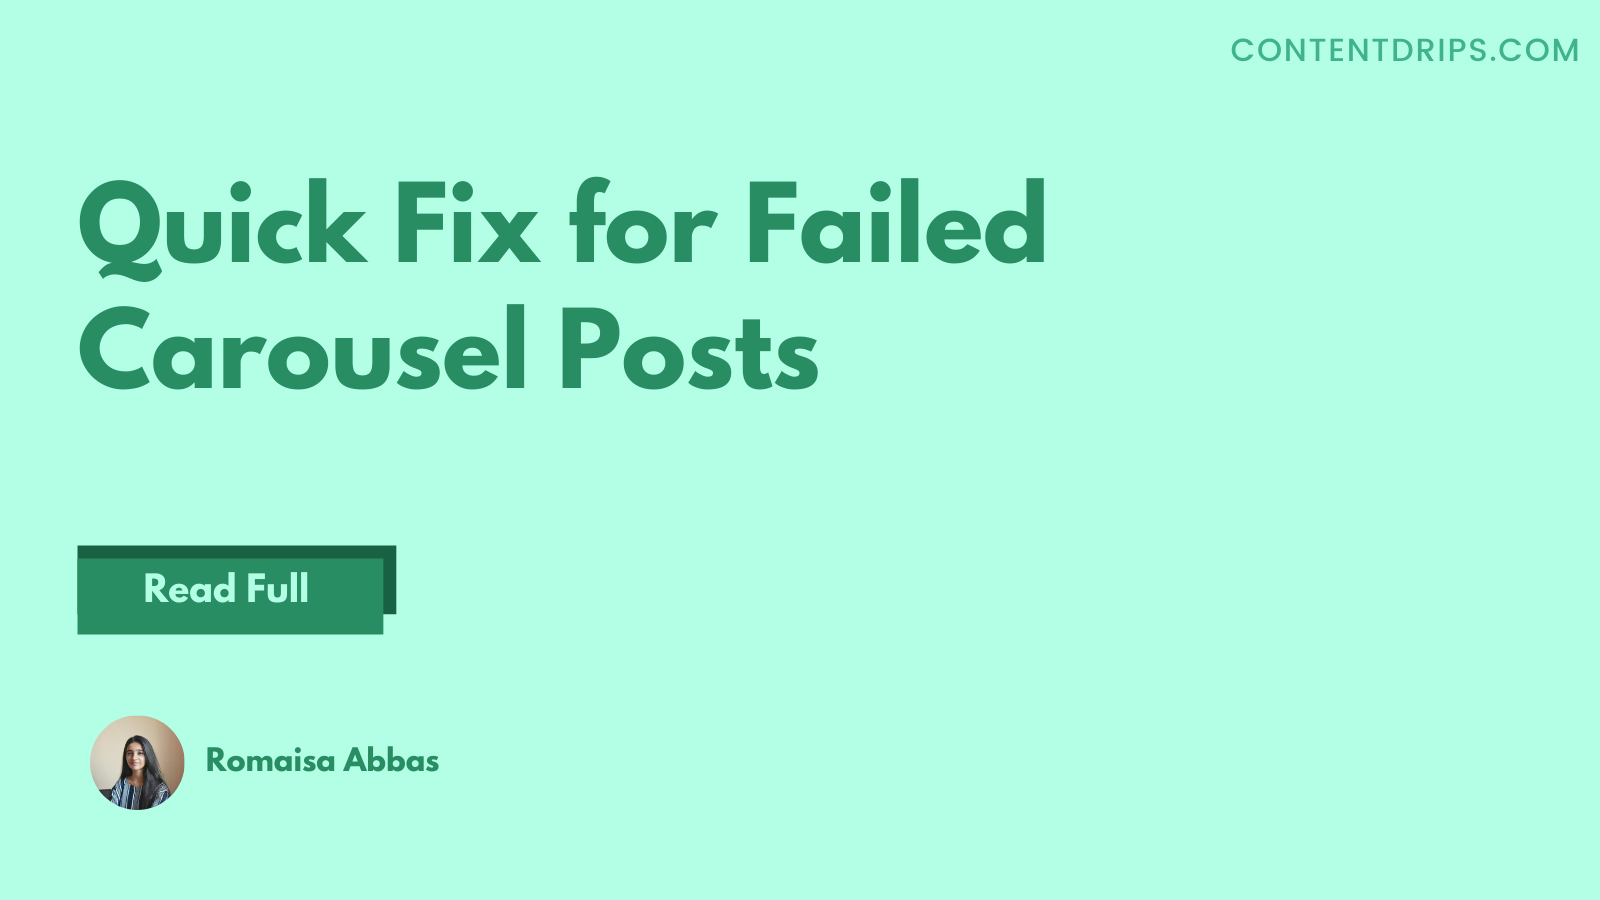 Quick fix for failed carousels posts